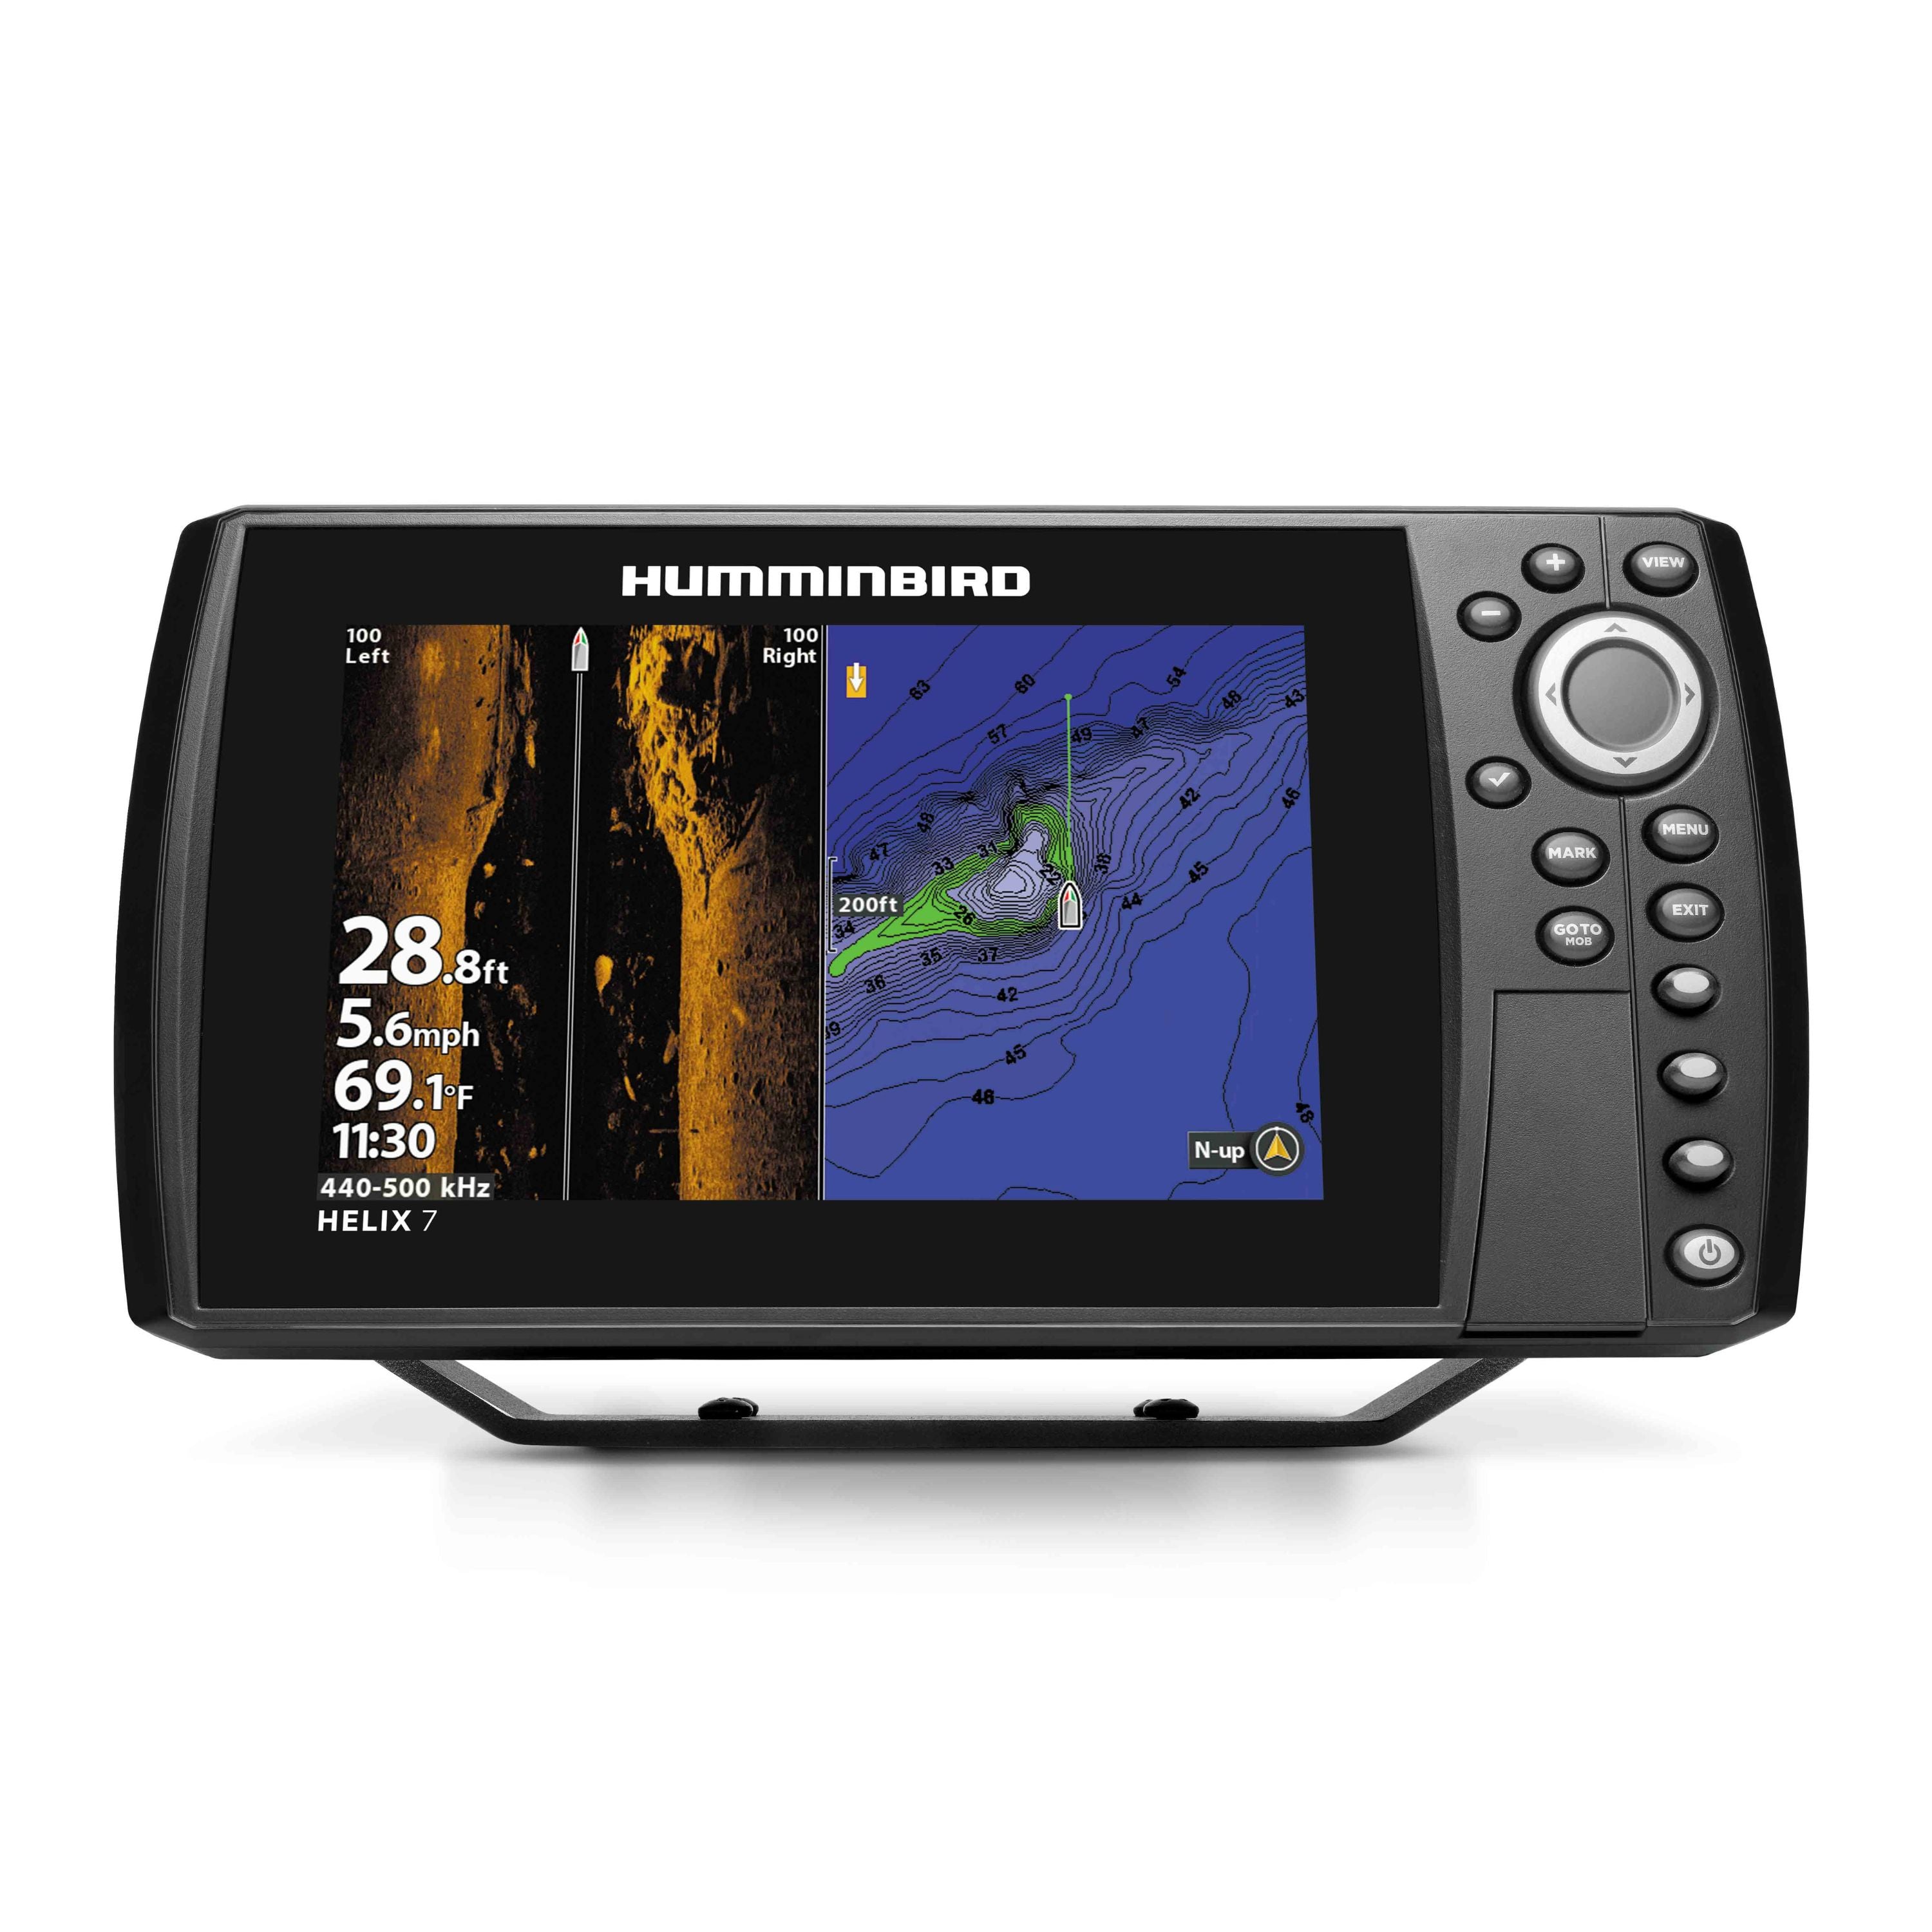 "Helix 7 SI GPS G4" Fish finder with Lakemaster map